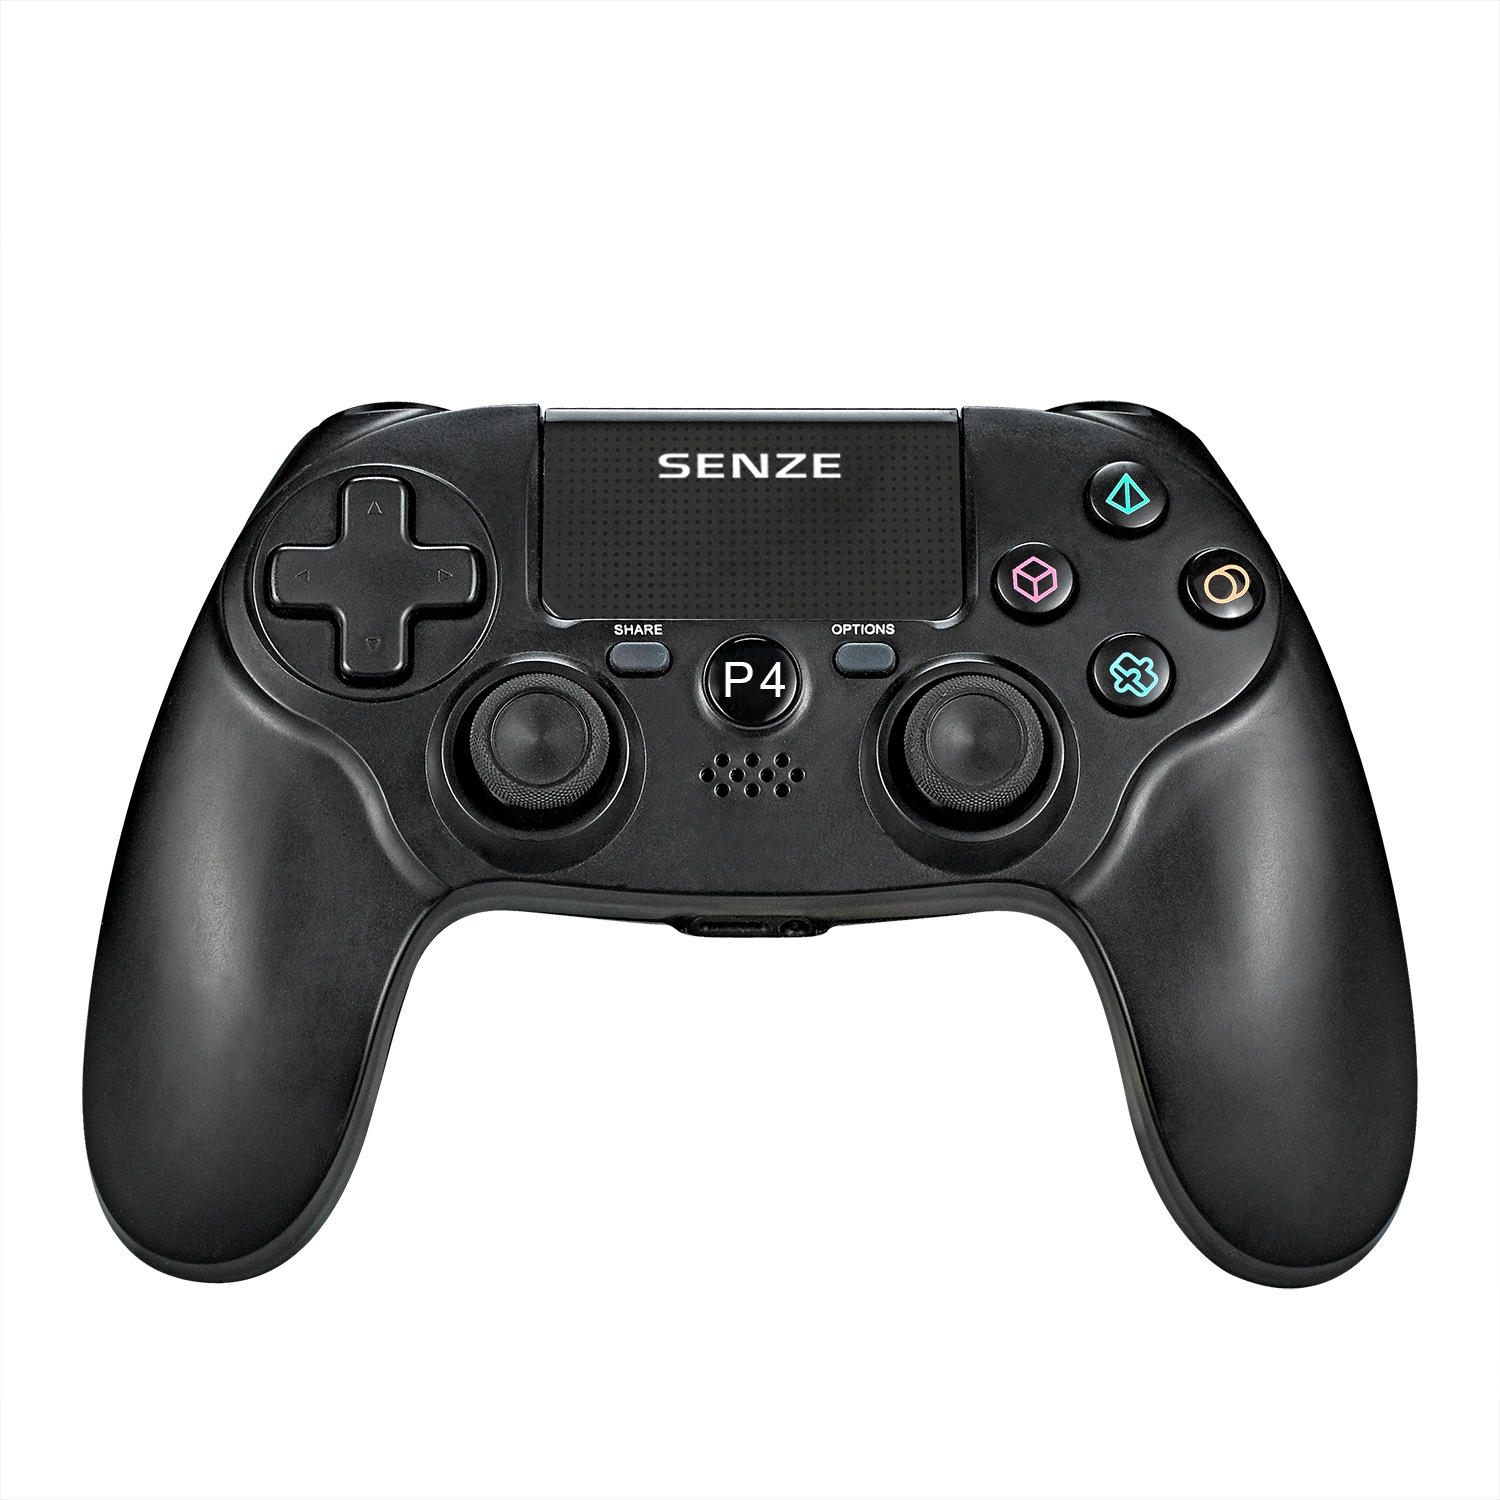 

Senze SZ-4003B bluetooth Game Controller Gamepad for Sony for Playstation 4 Game Console PS4